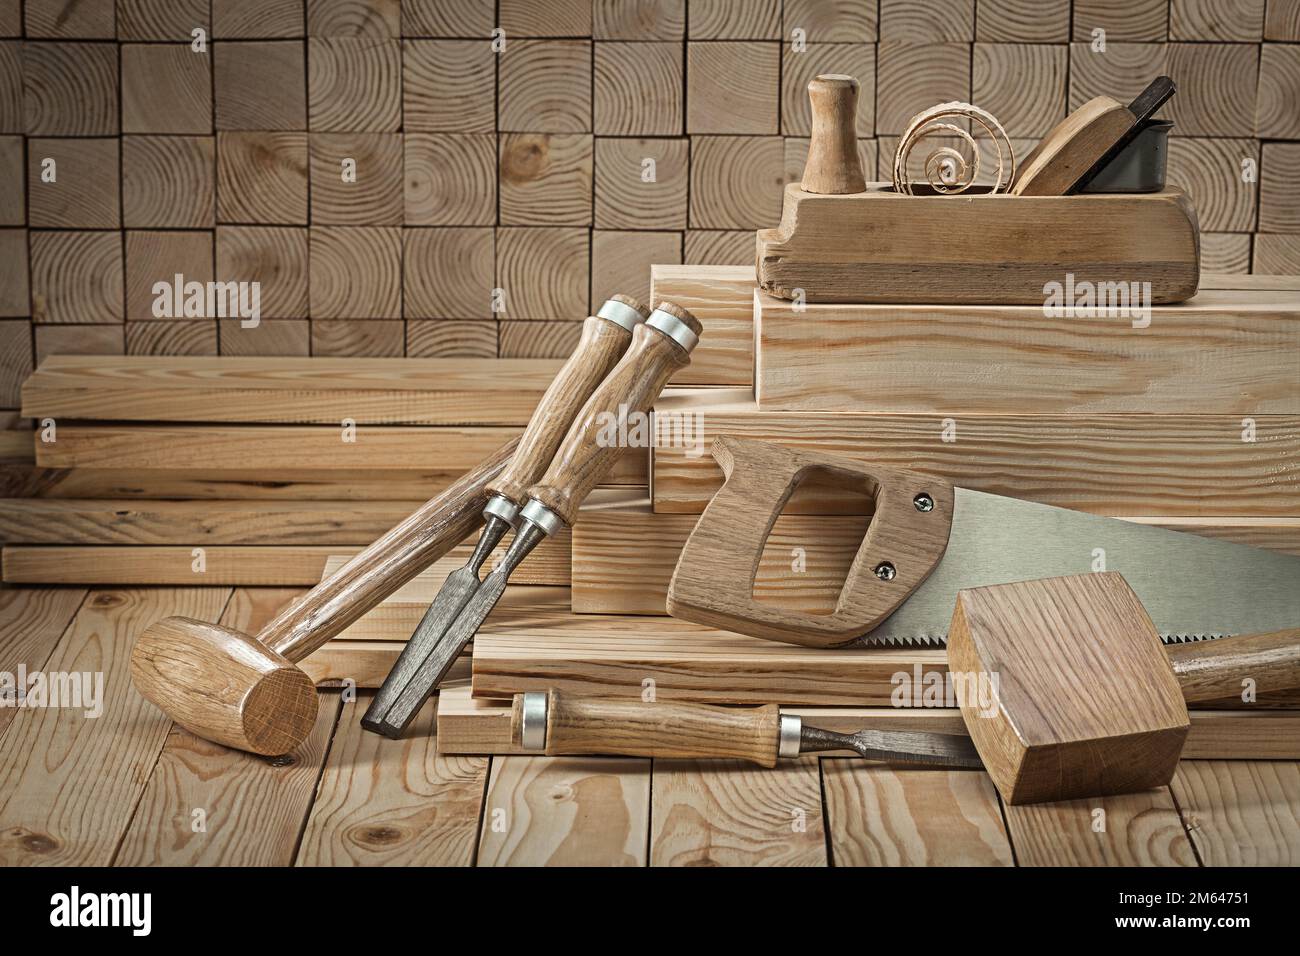 set of carpentry tools wooden mallets chisels woodworking planner on wood background Stock Photo